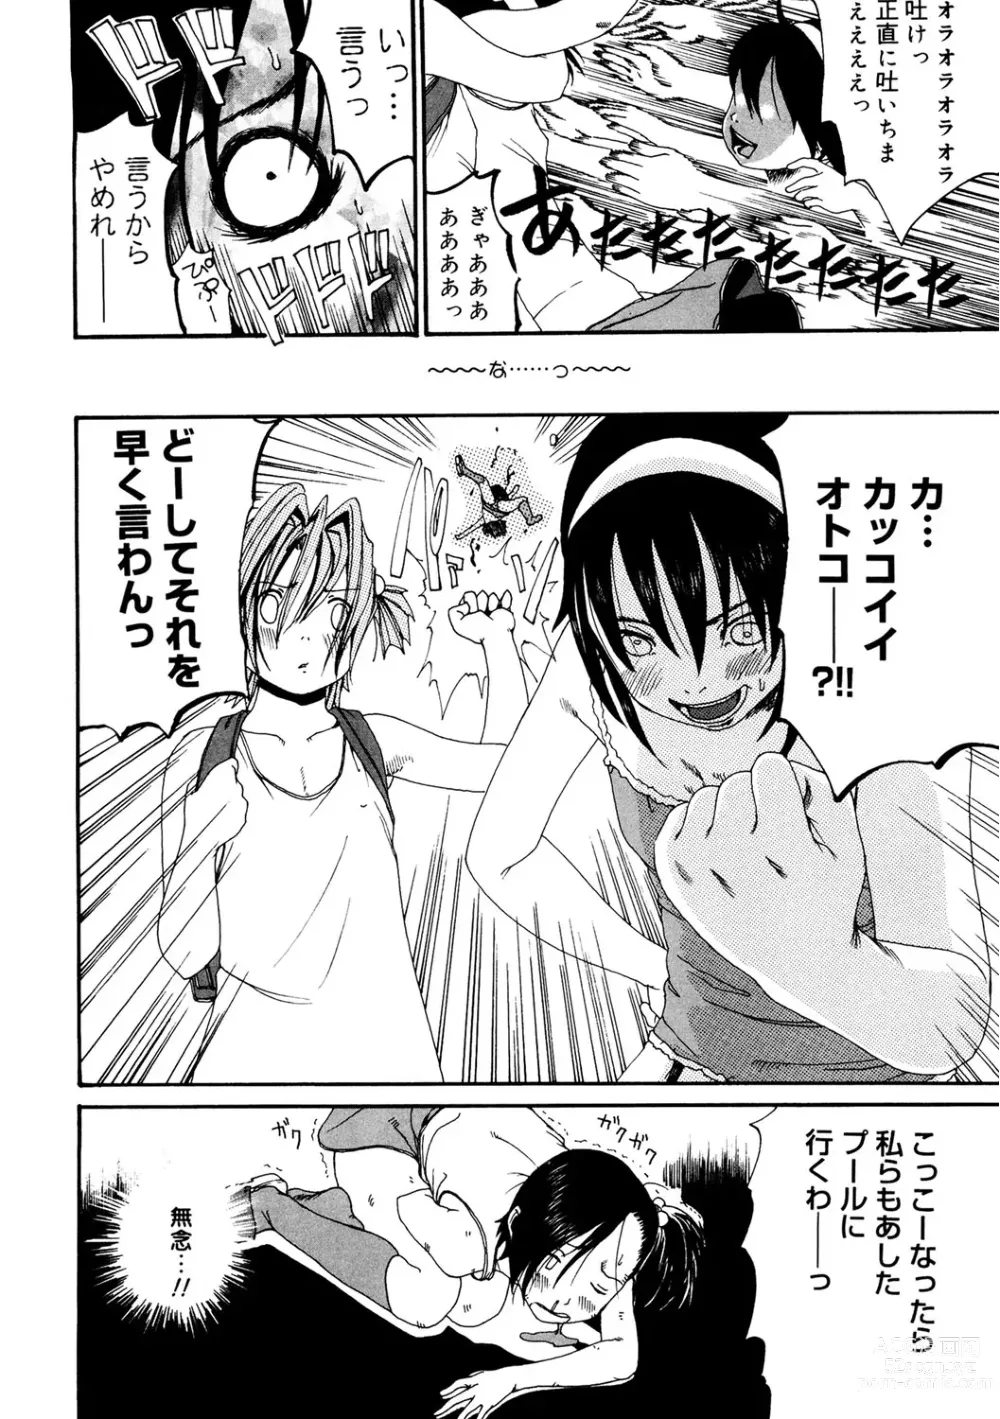 Page 182 of manga LQ -Little Queen- Vol. 52